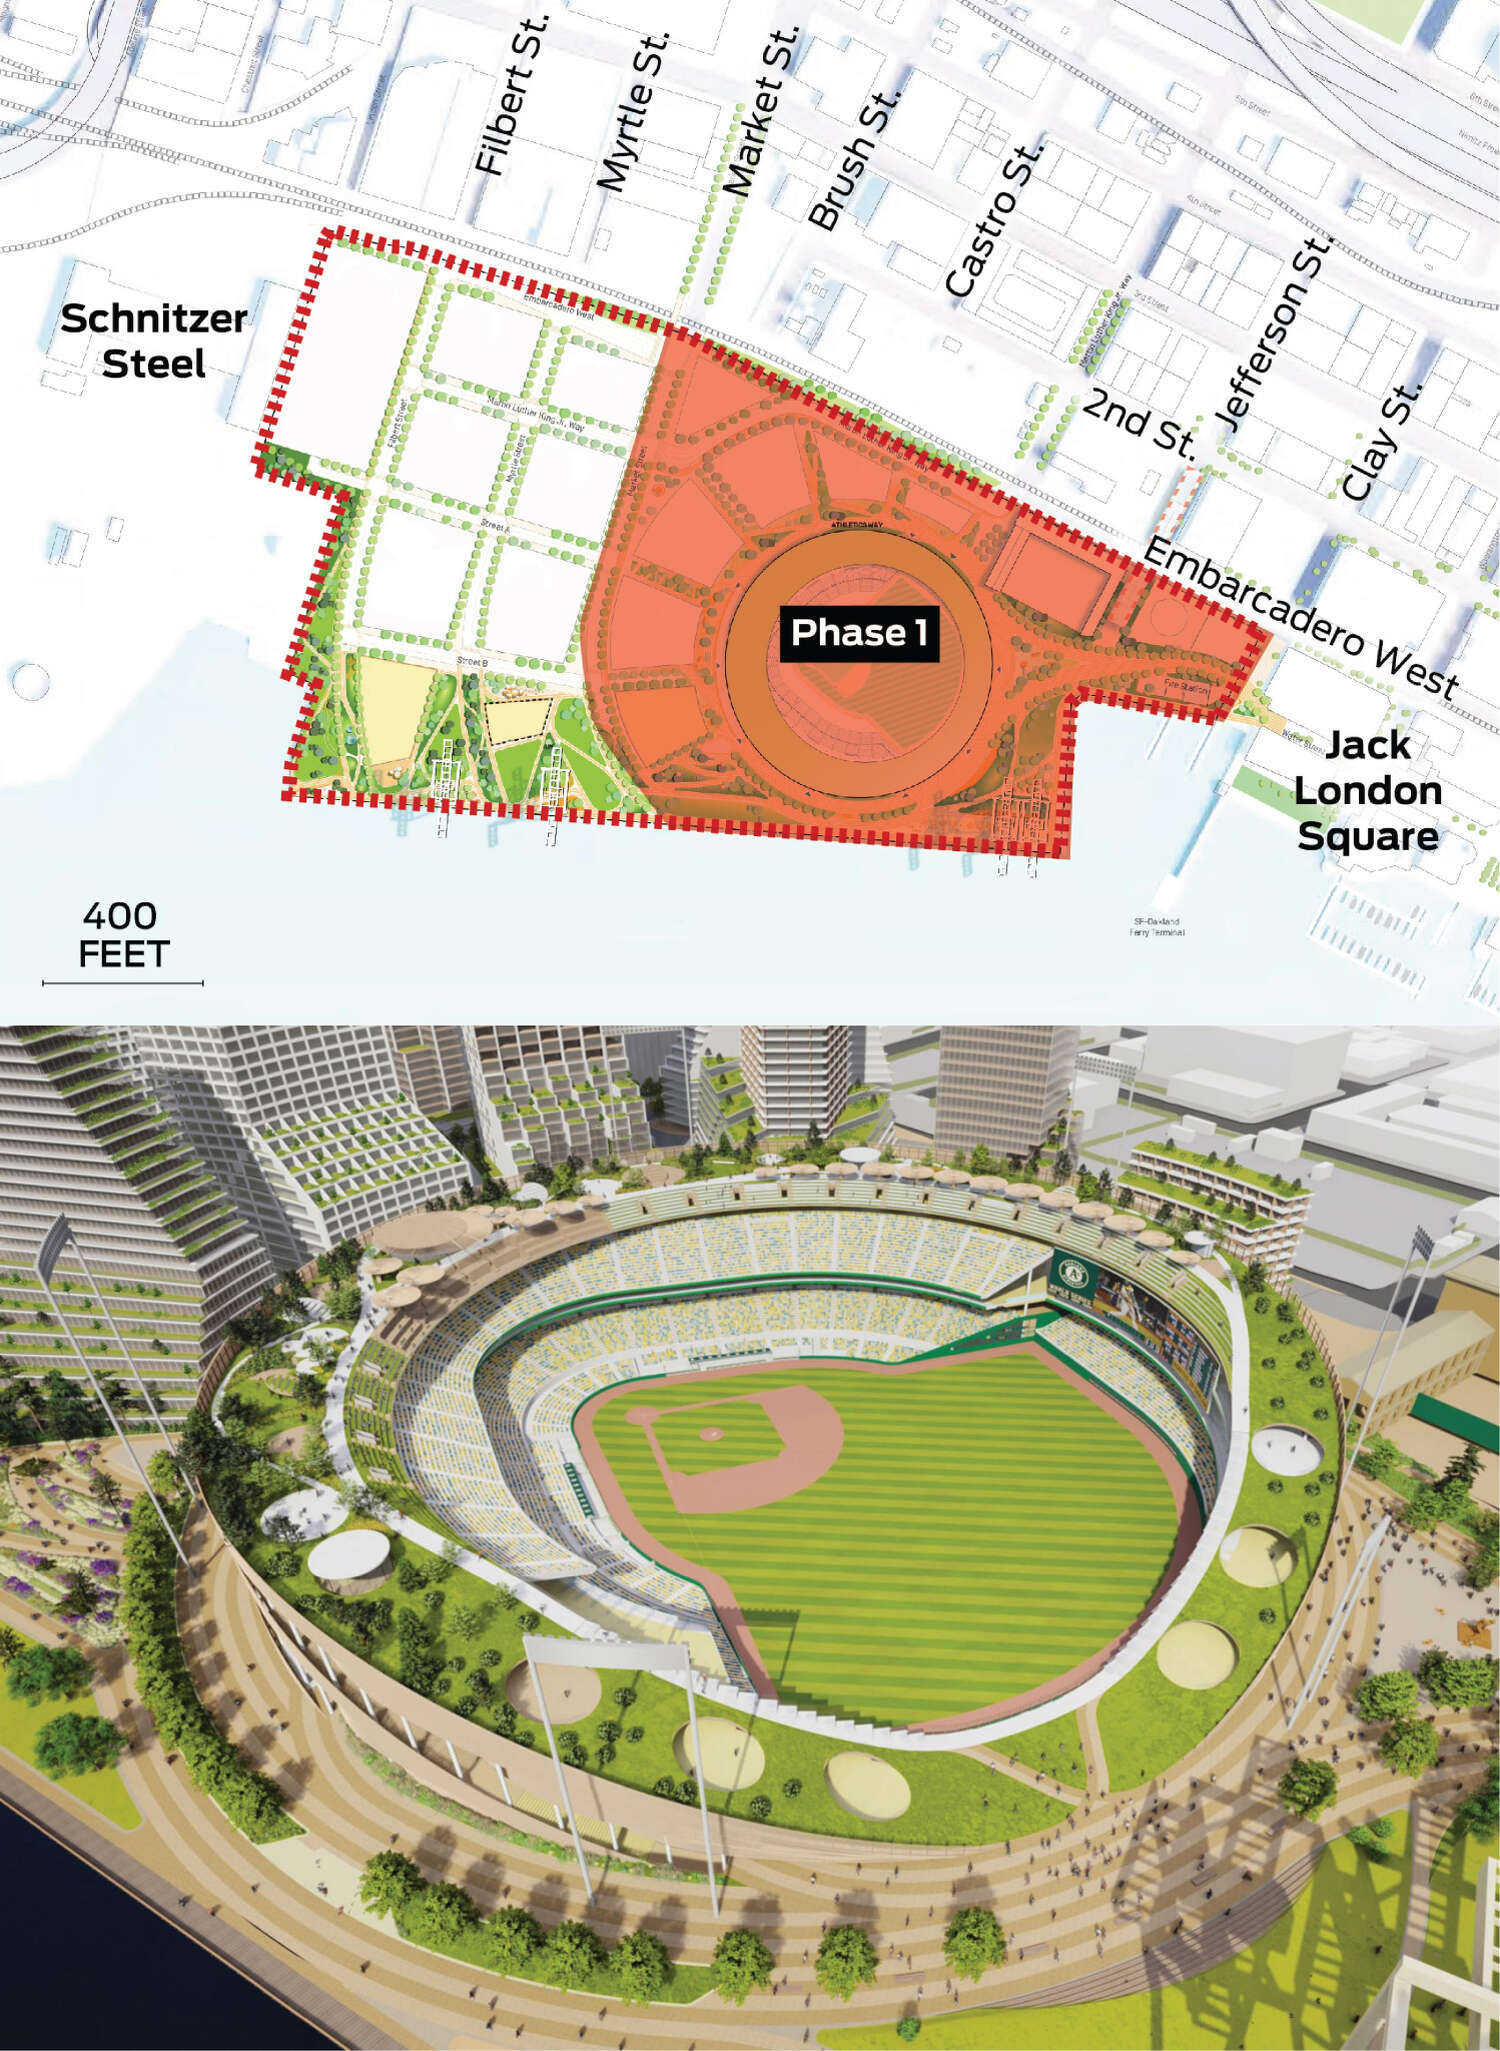 The area east of Market Street is highlighted as phase 1. A rendering focused on the ballpark is displayed.